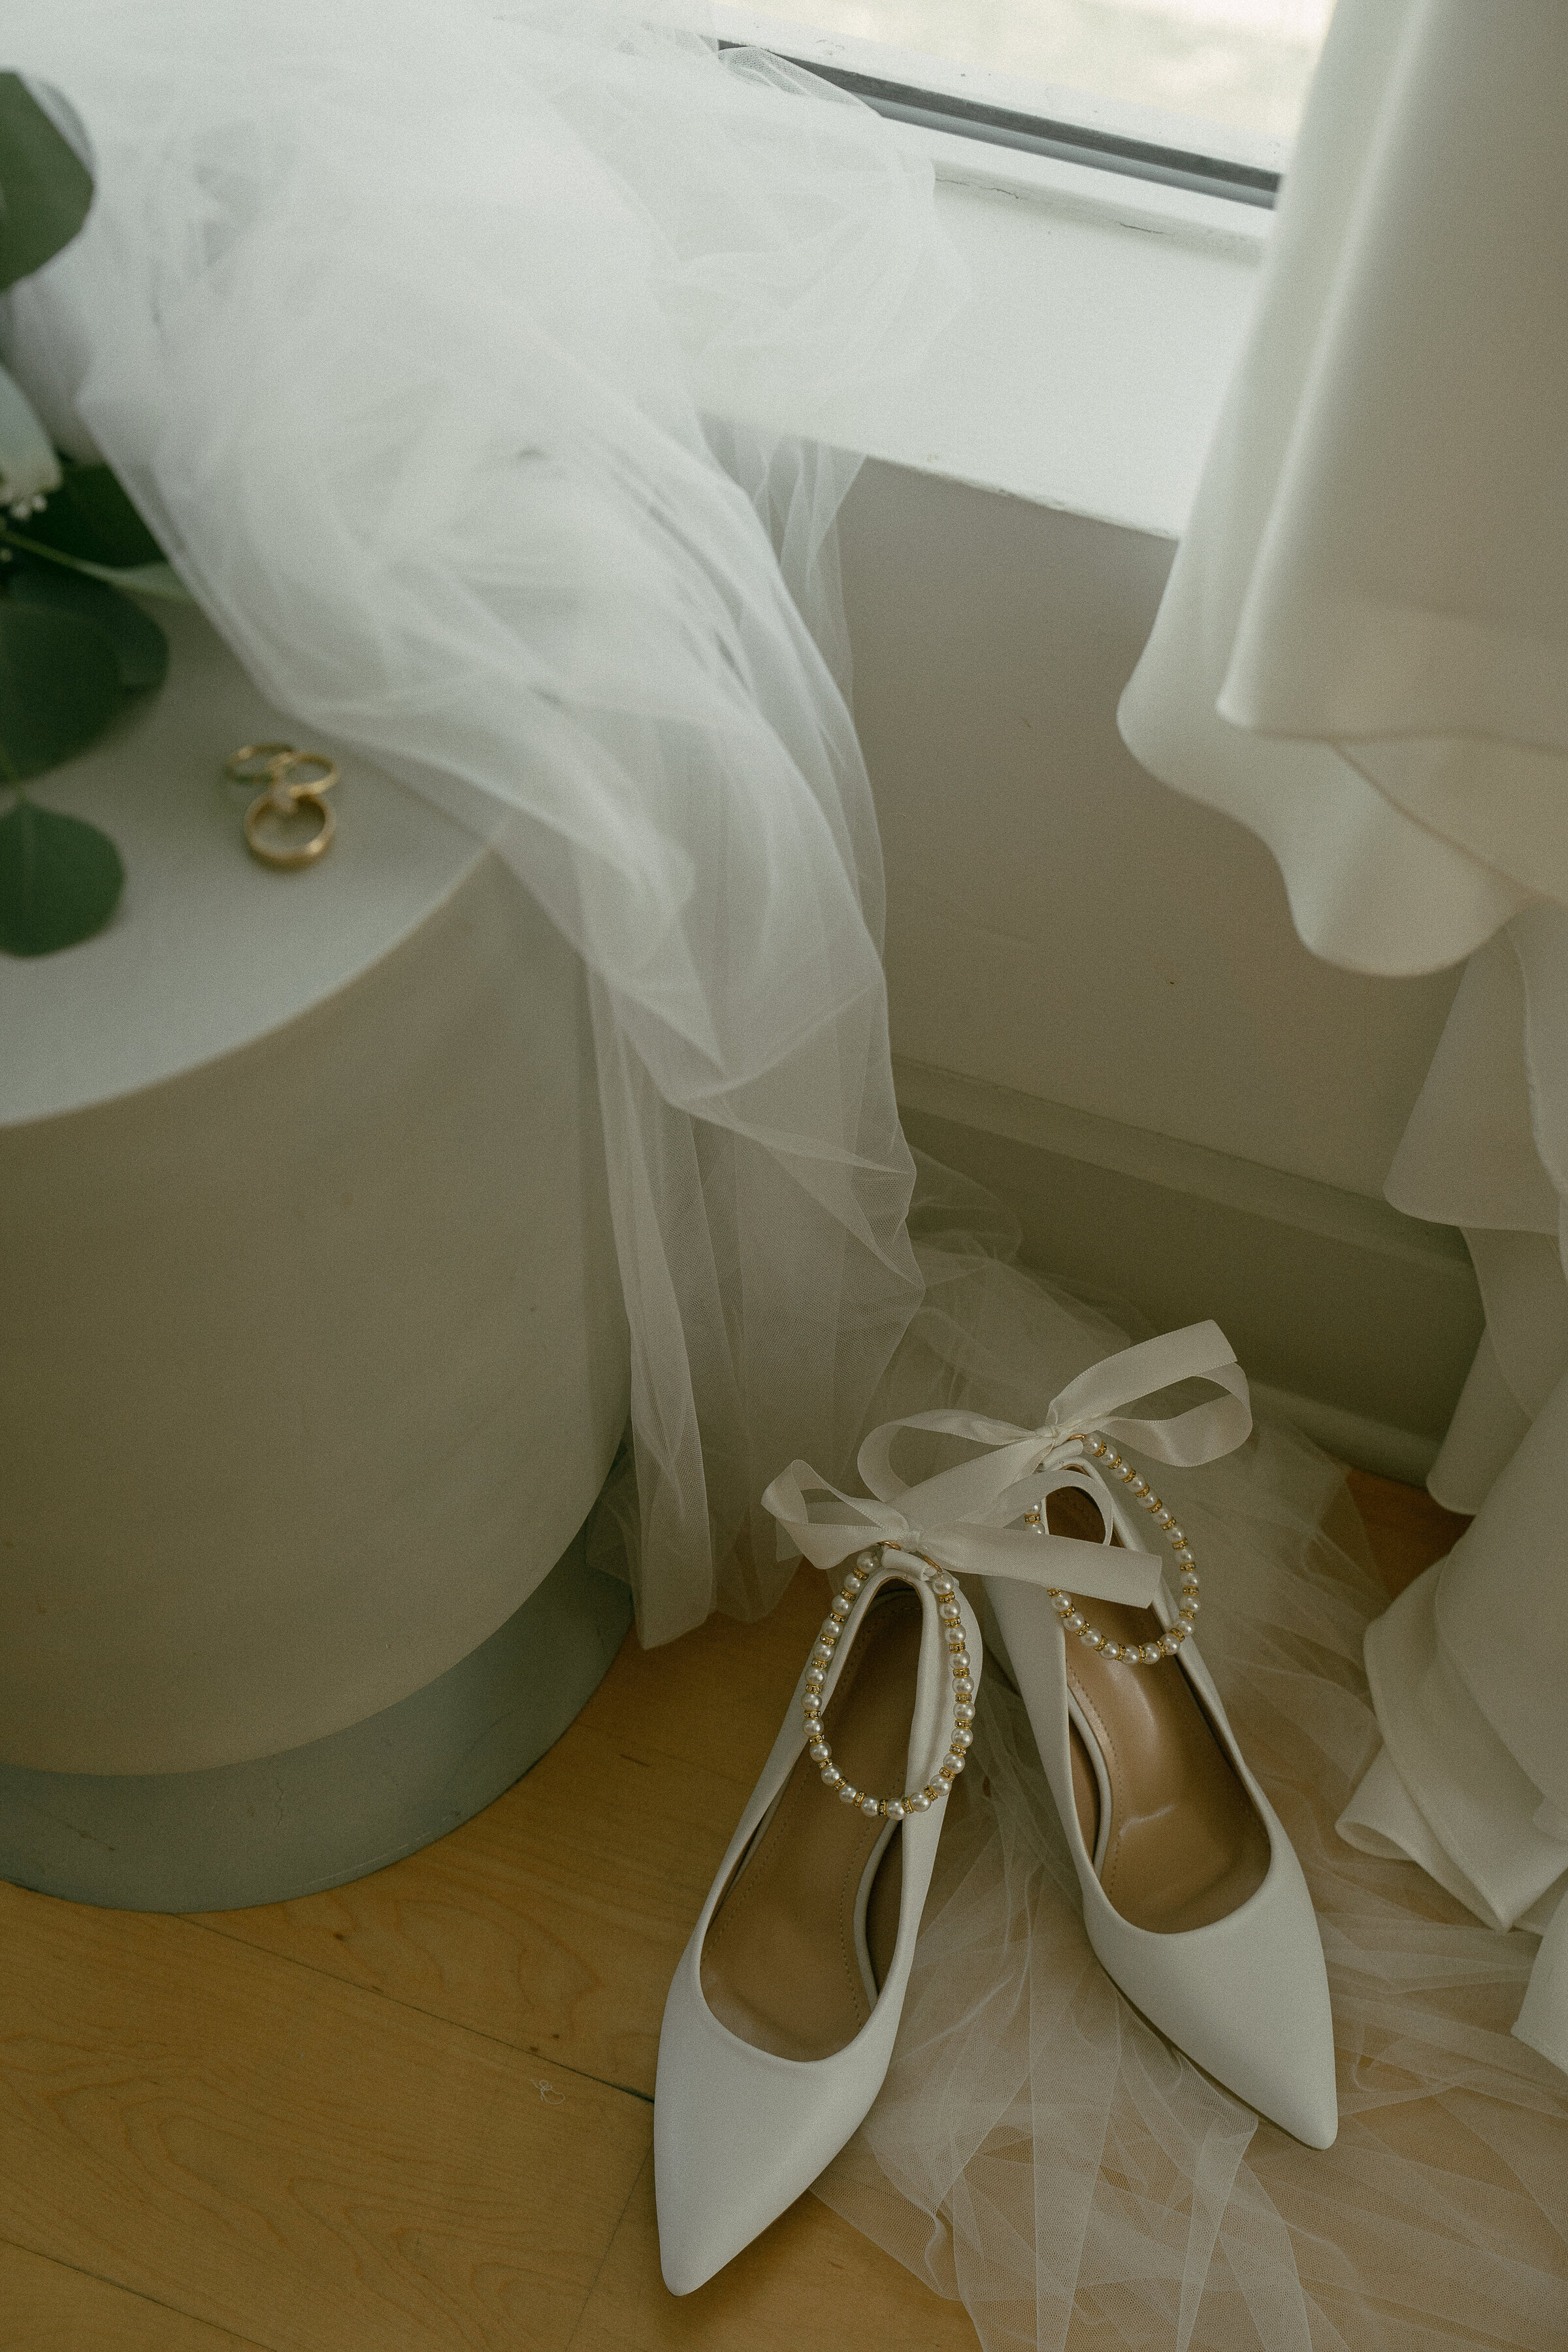 Bridal shoes and veil next to a window, wedding preparation theme.